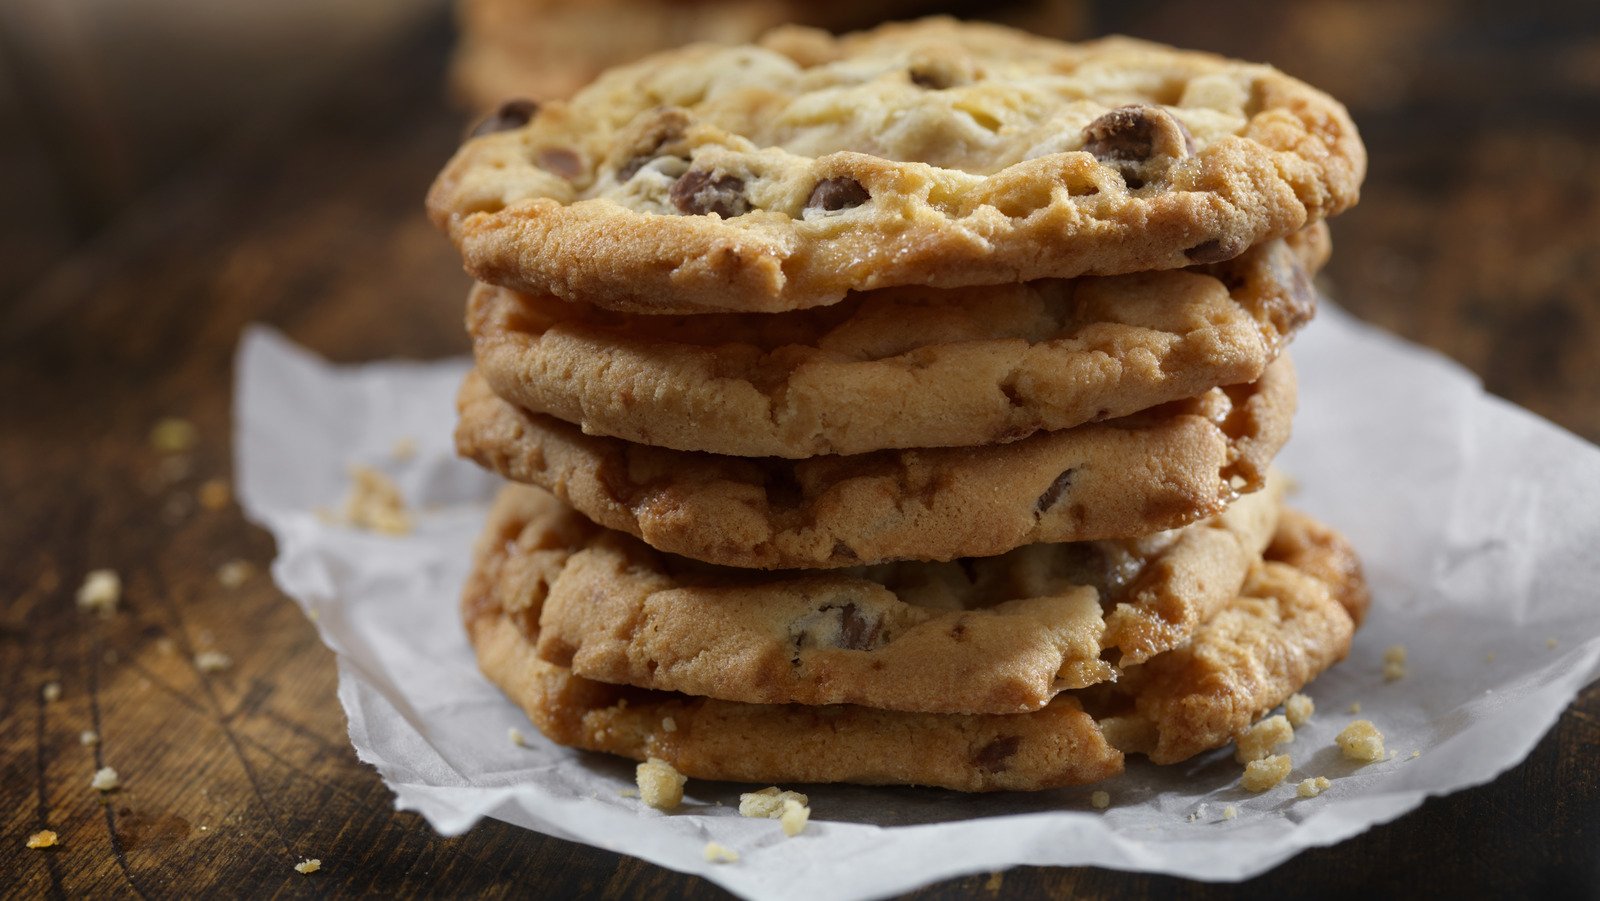 Cream Cheese Is The Secret Ingredient For Soft Chewy Cookies